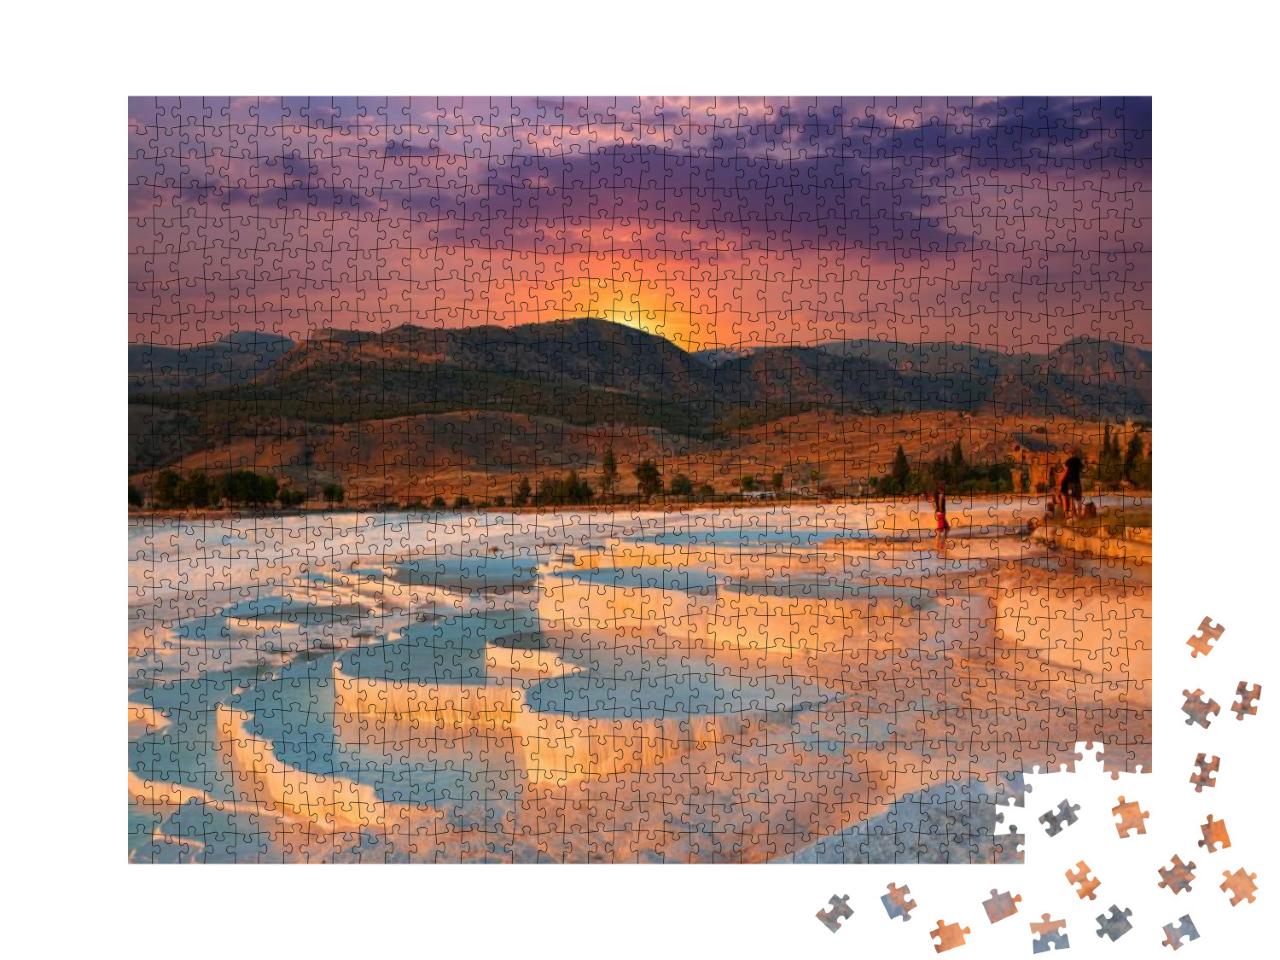 Beautiful Sunrise & Natural Travertine Pools & Terraces i... Jigsaw Puzzle with 1000 pieces